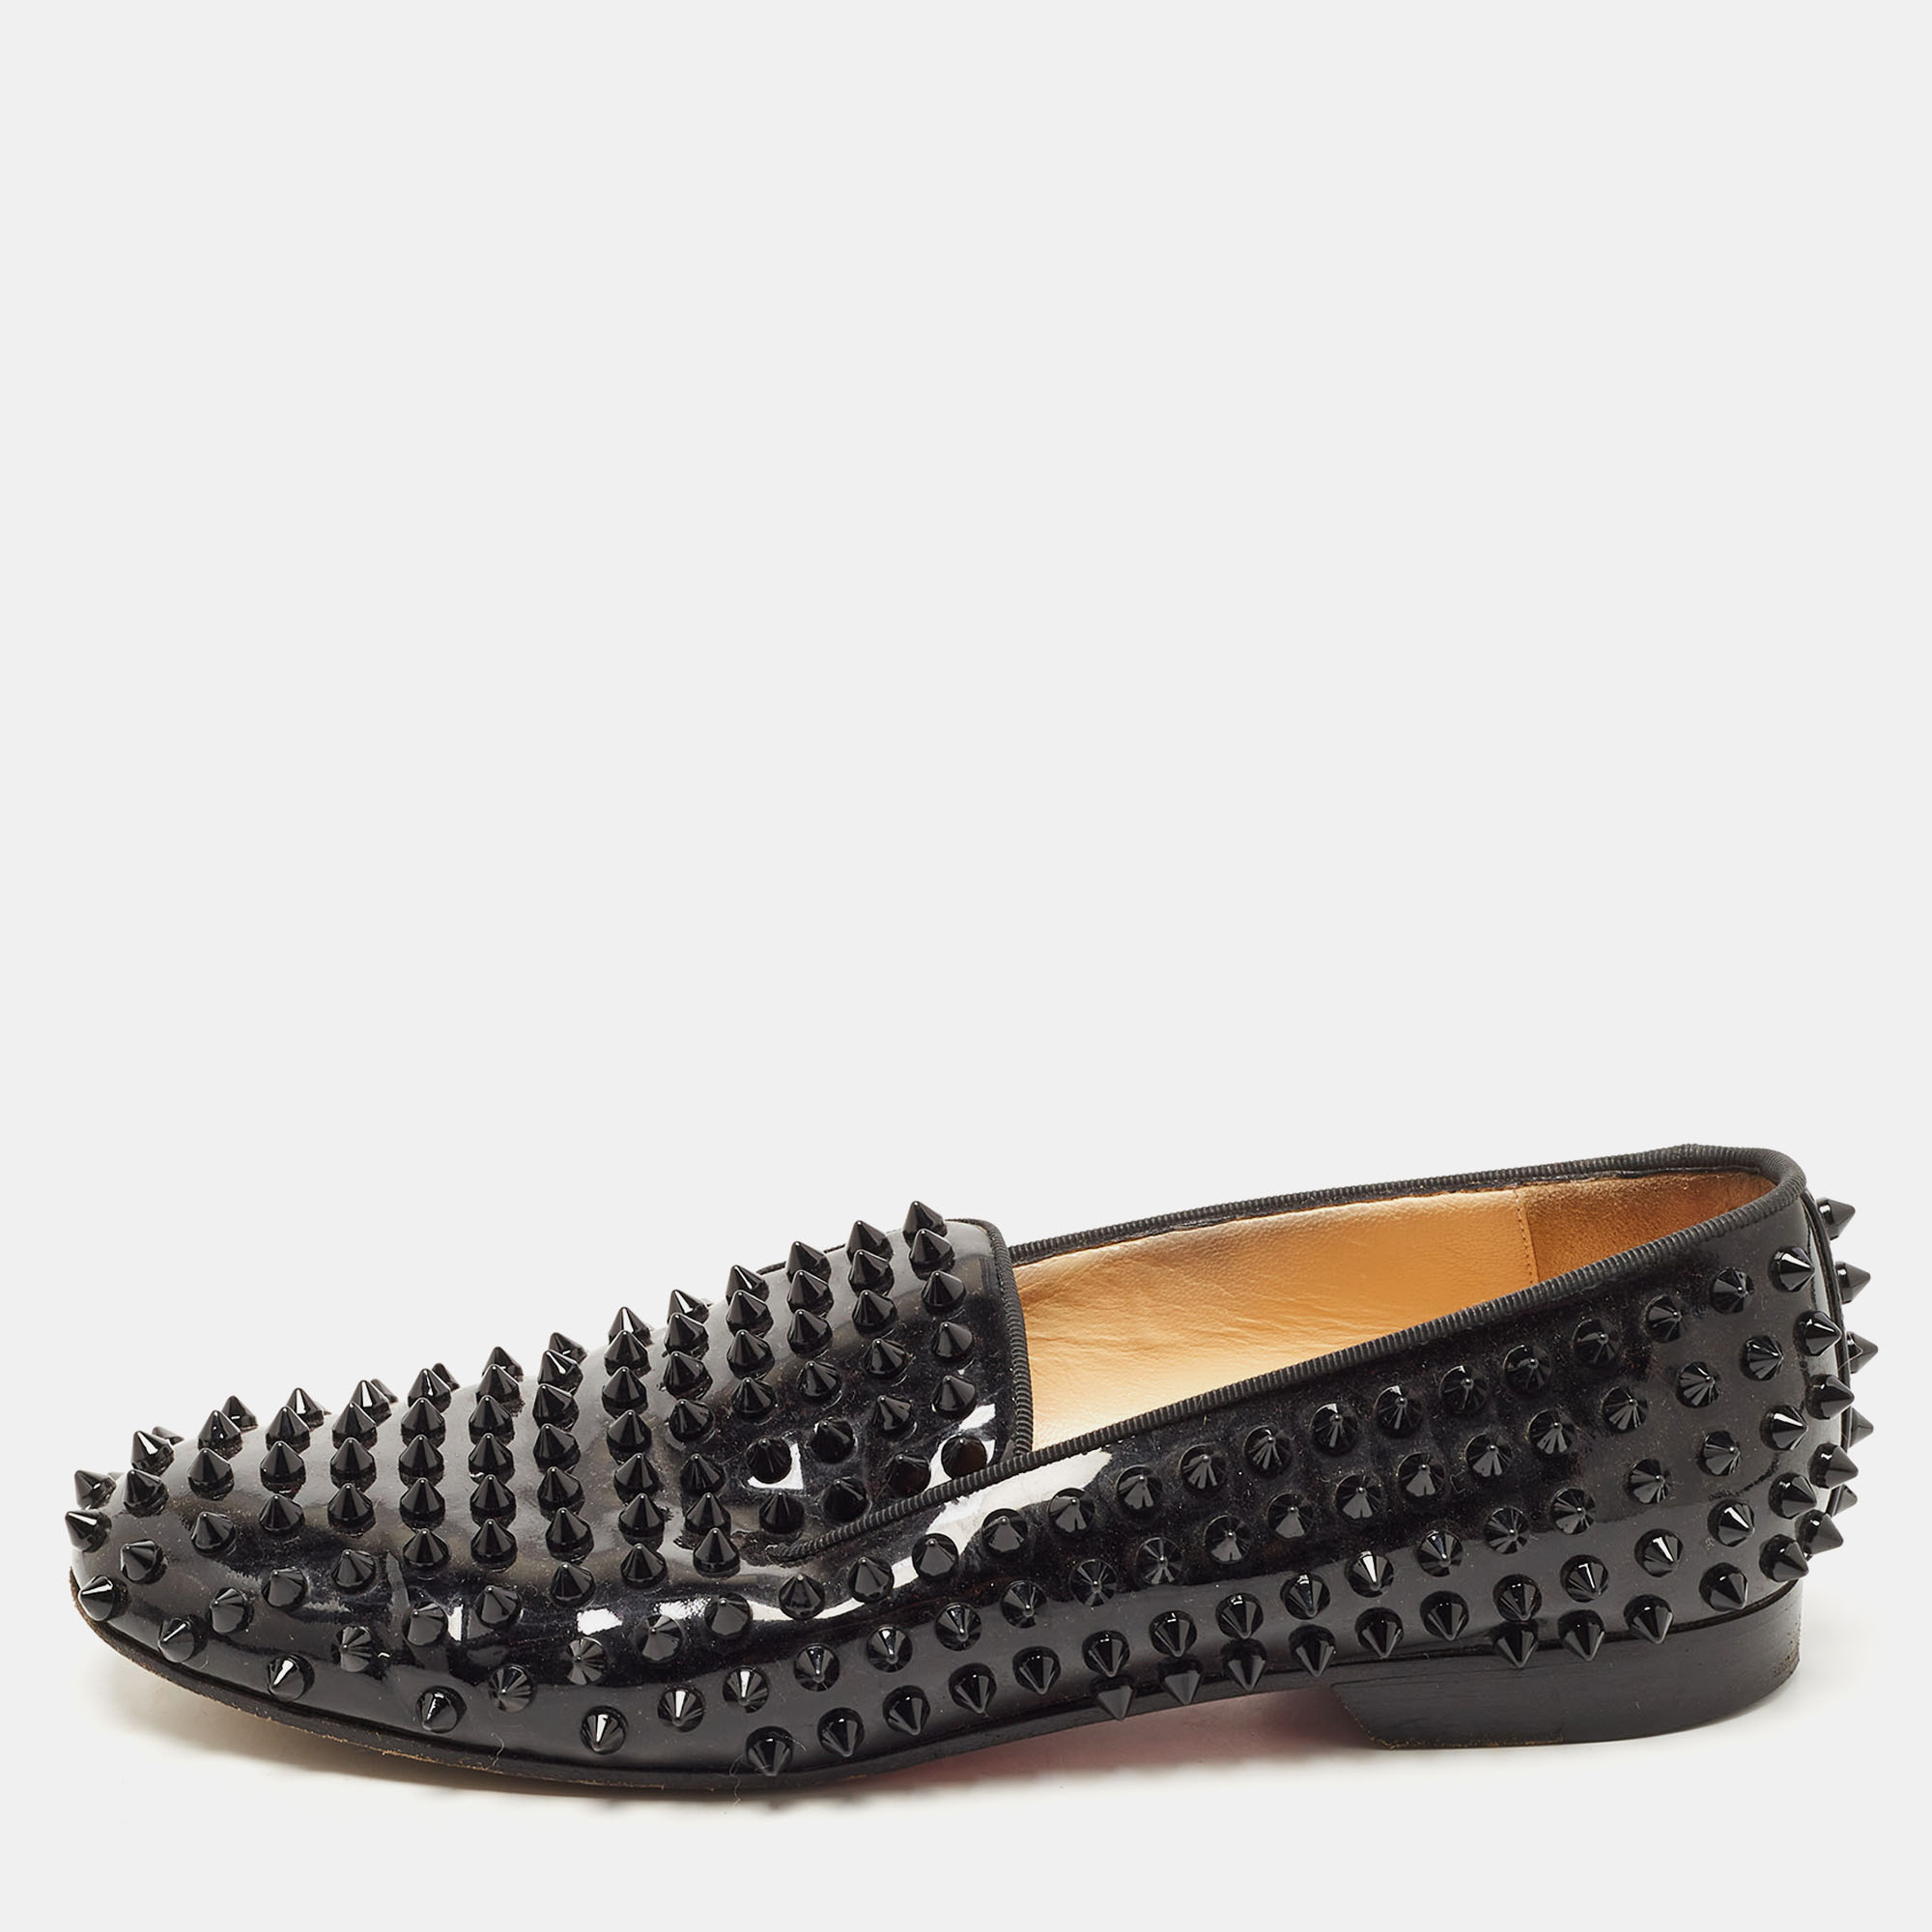 

Christian Louboutin Black Patent Leather Dandelion Spikes Smoking Slippers Size